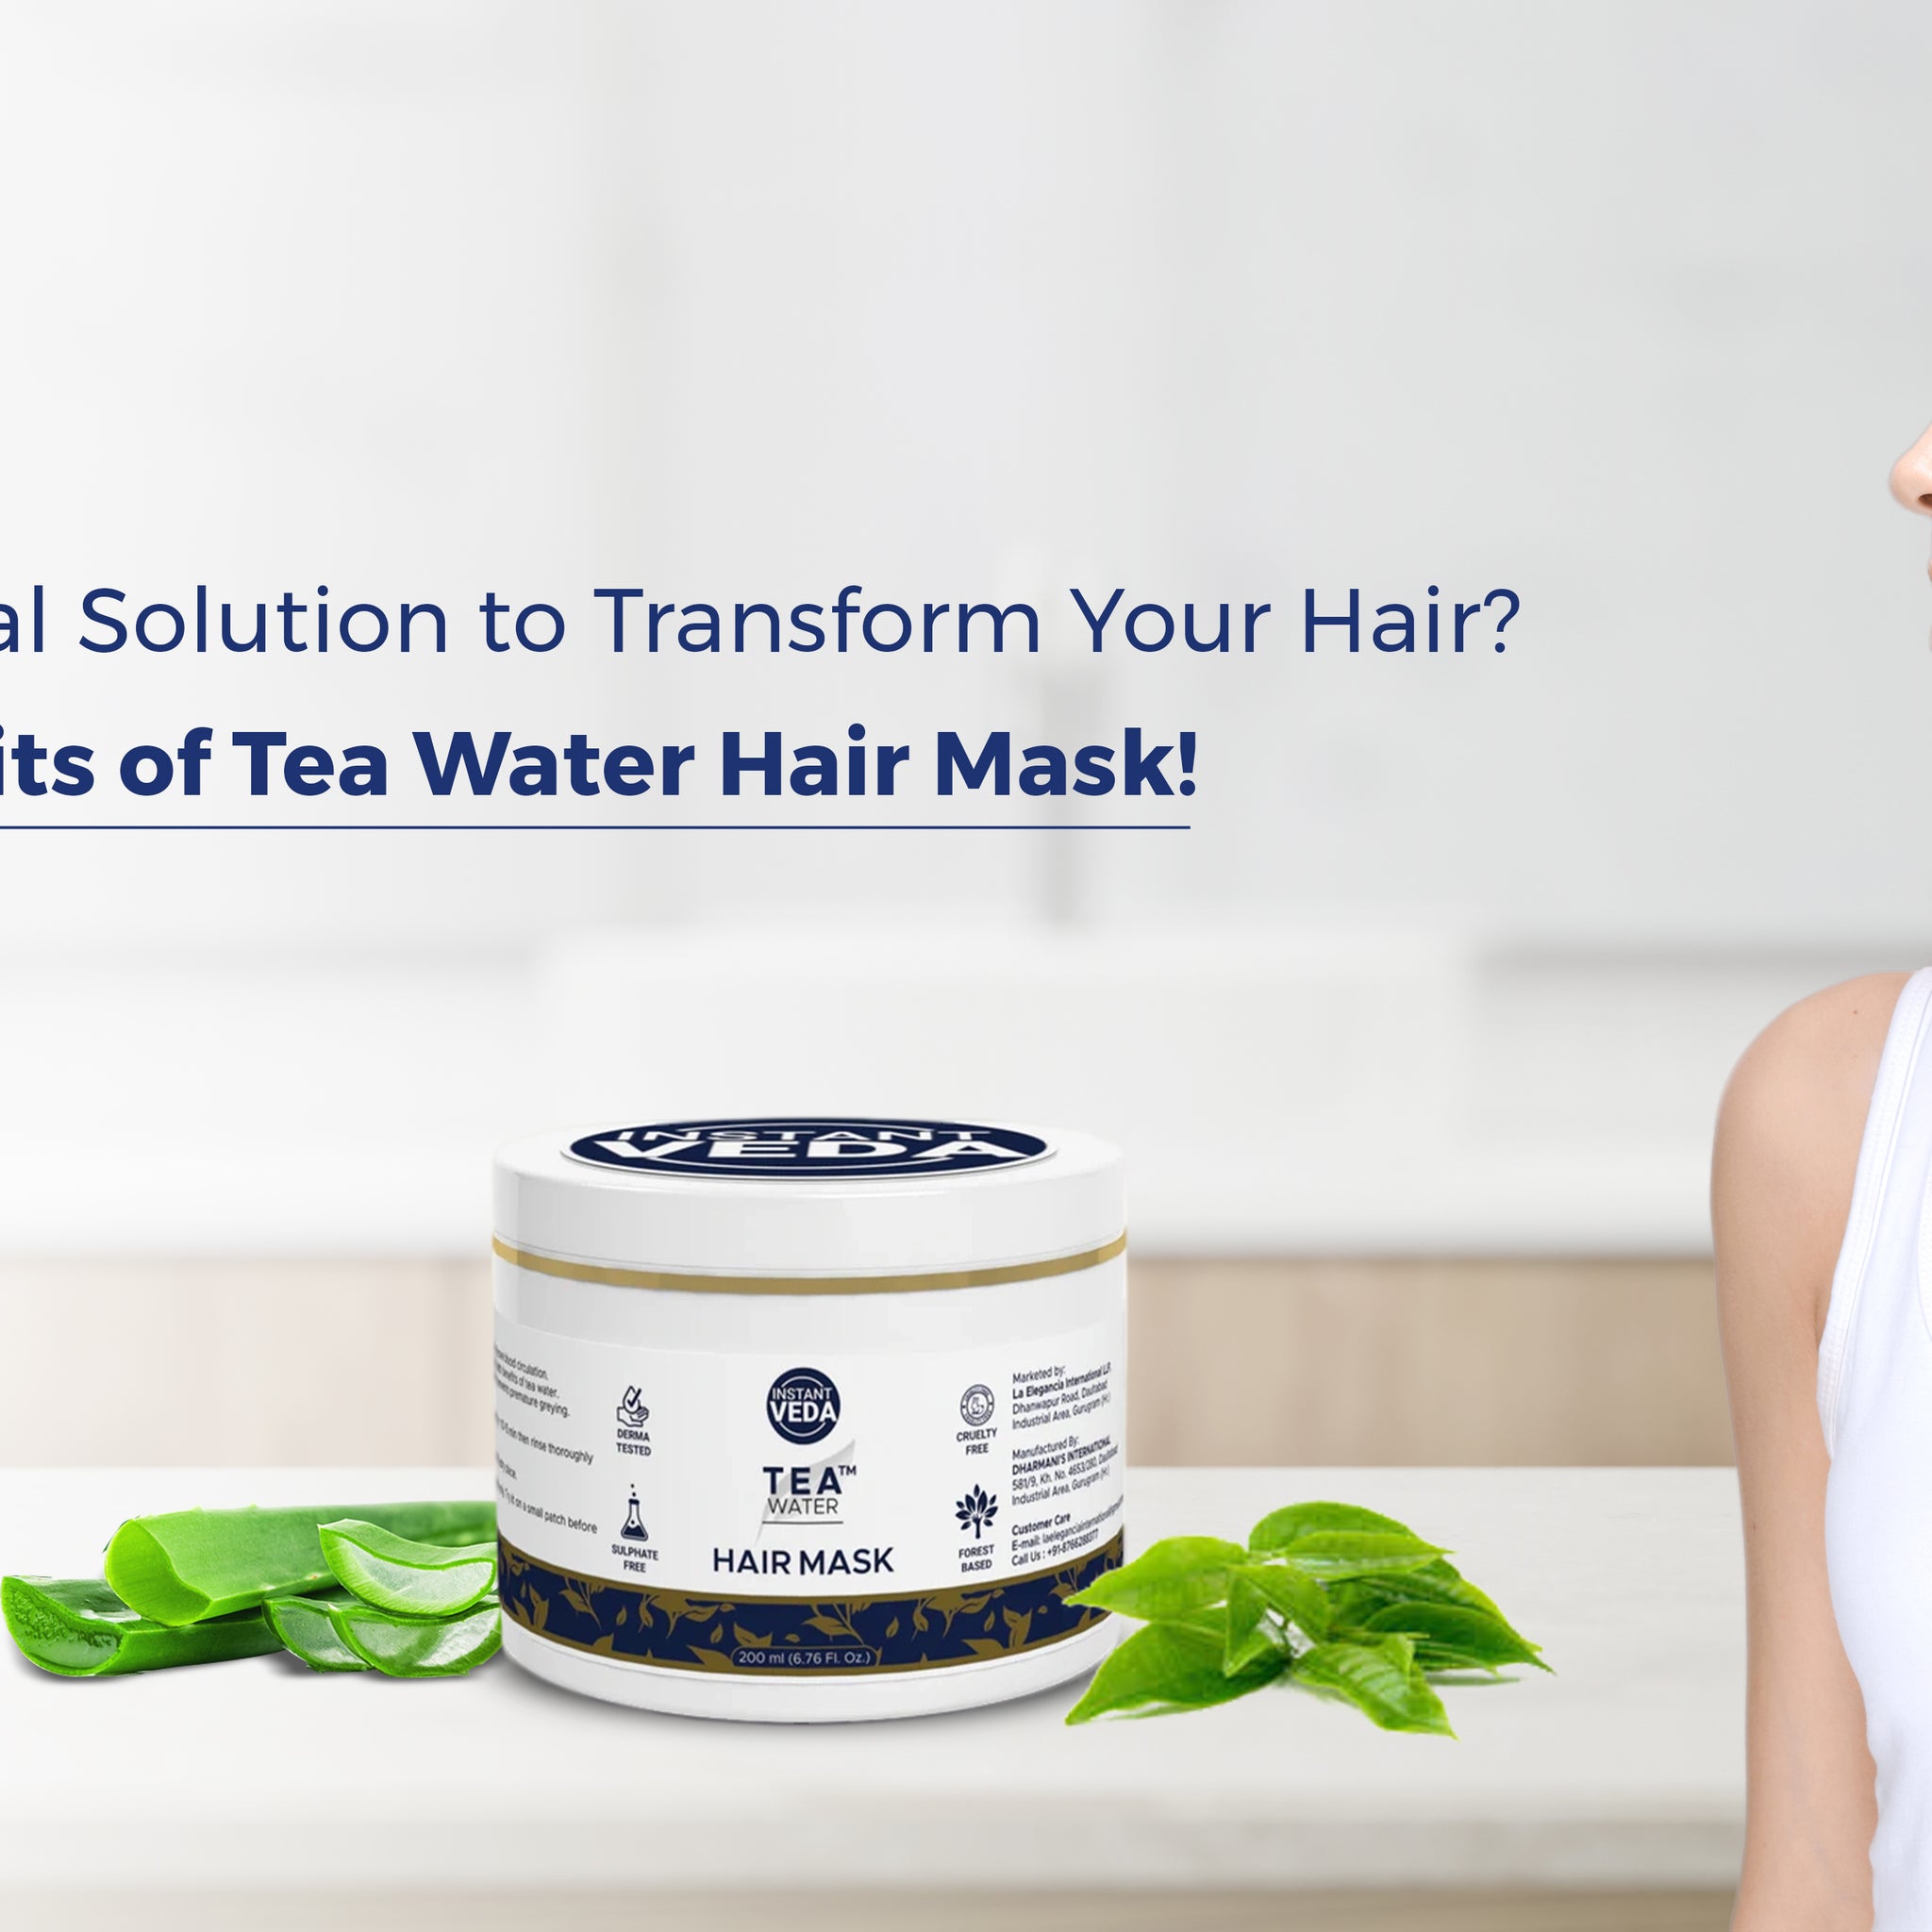 Looking for a Natural Solution to Transform Your Hair? Discover the Benefits of Tea Water Hair Mask!